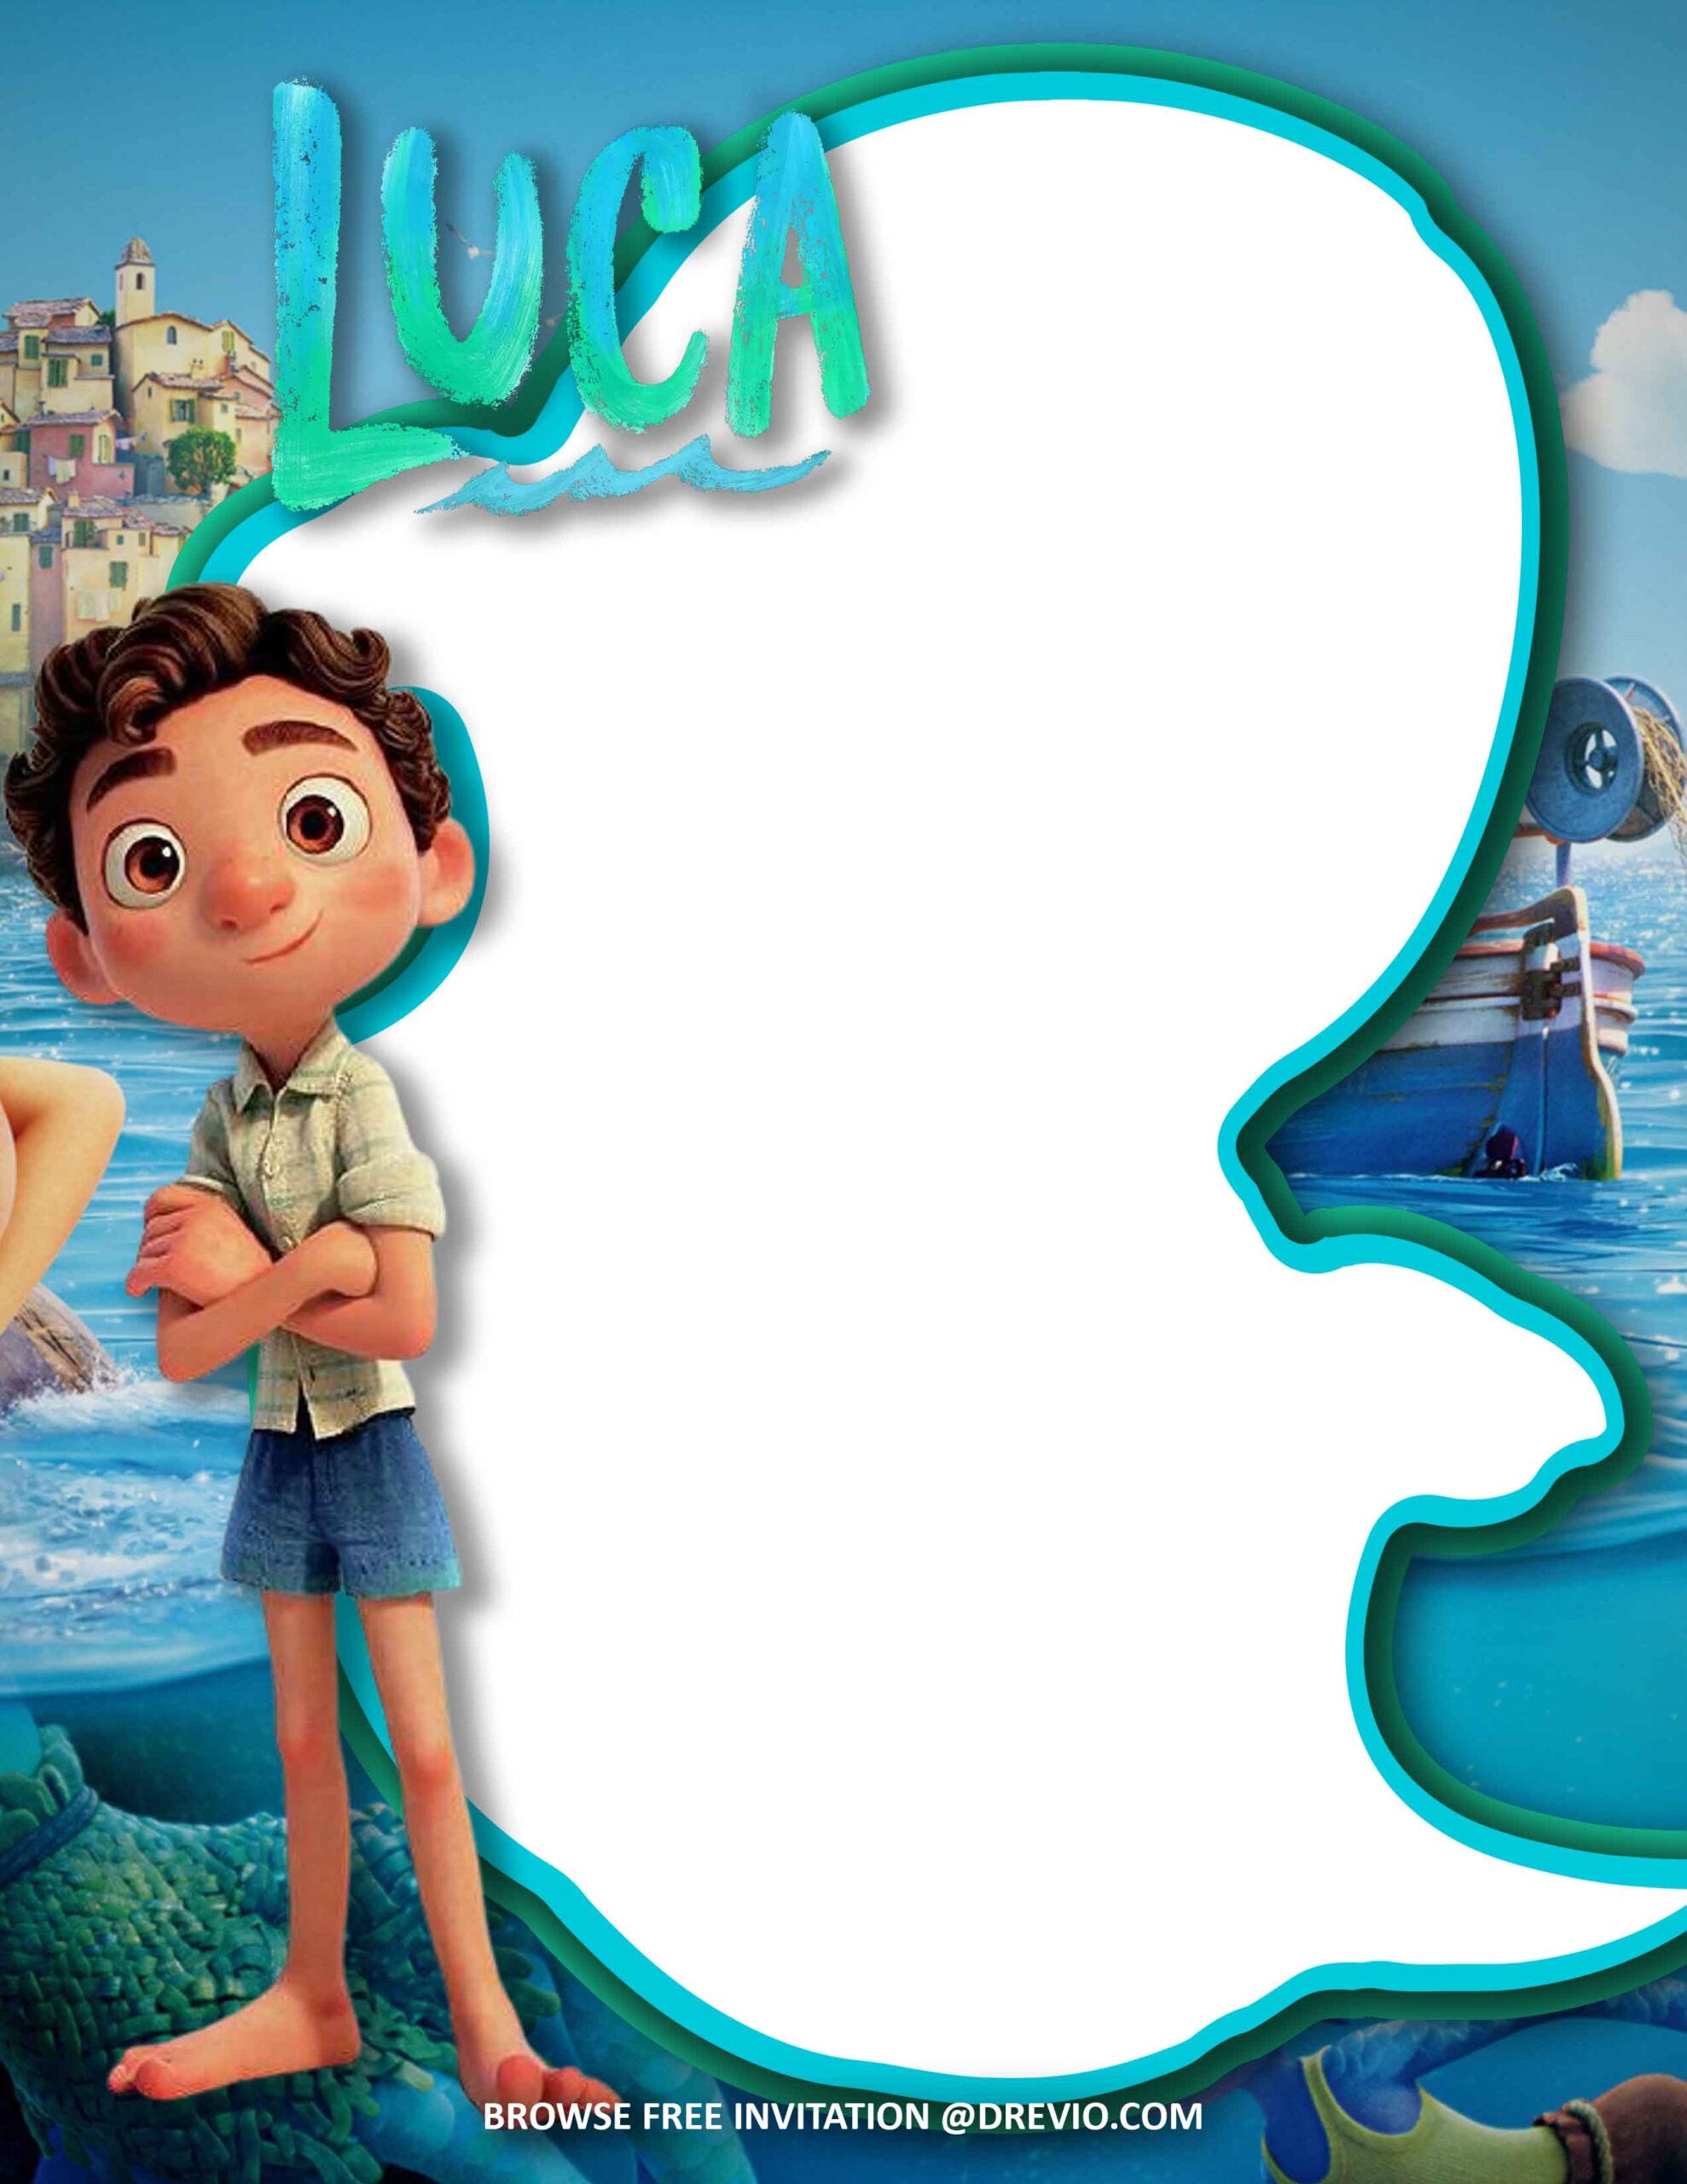 Luca has taken Disney by storm and now everyone wants a Luca birthday party.  Here's everything I …